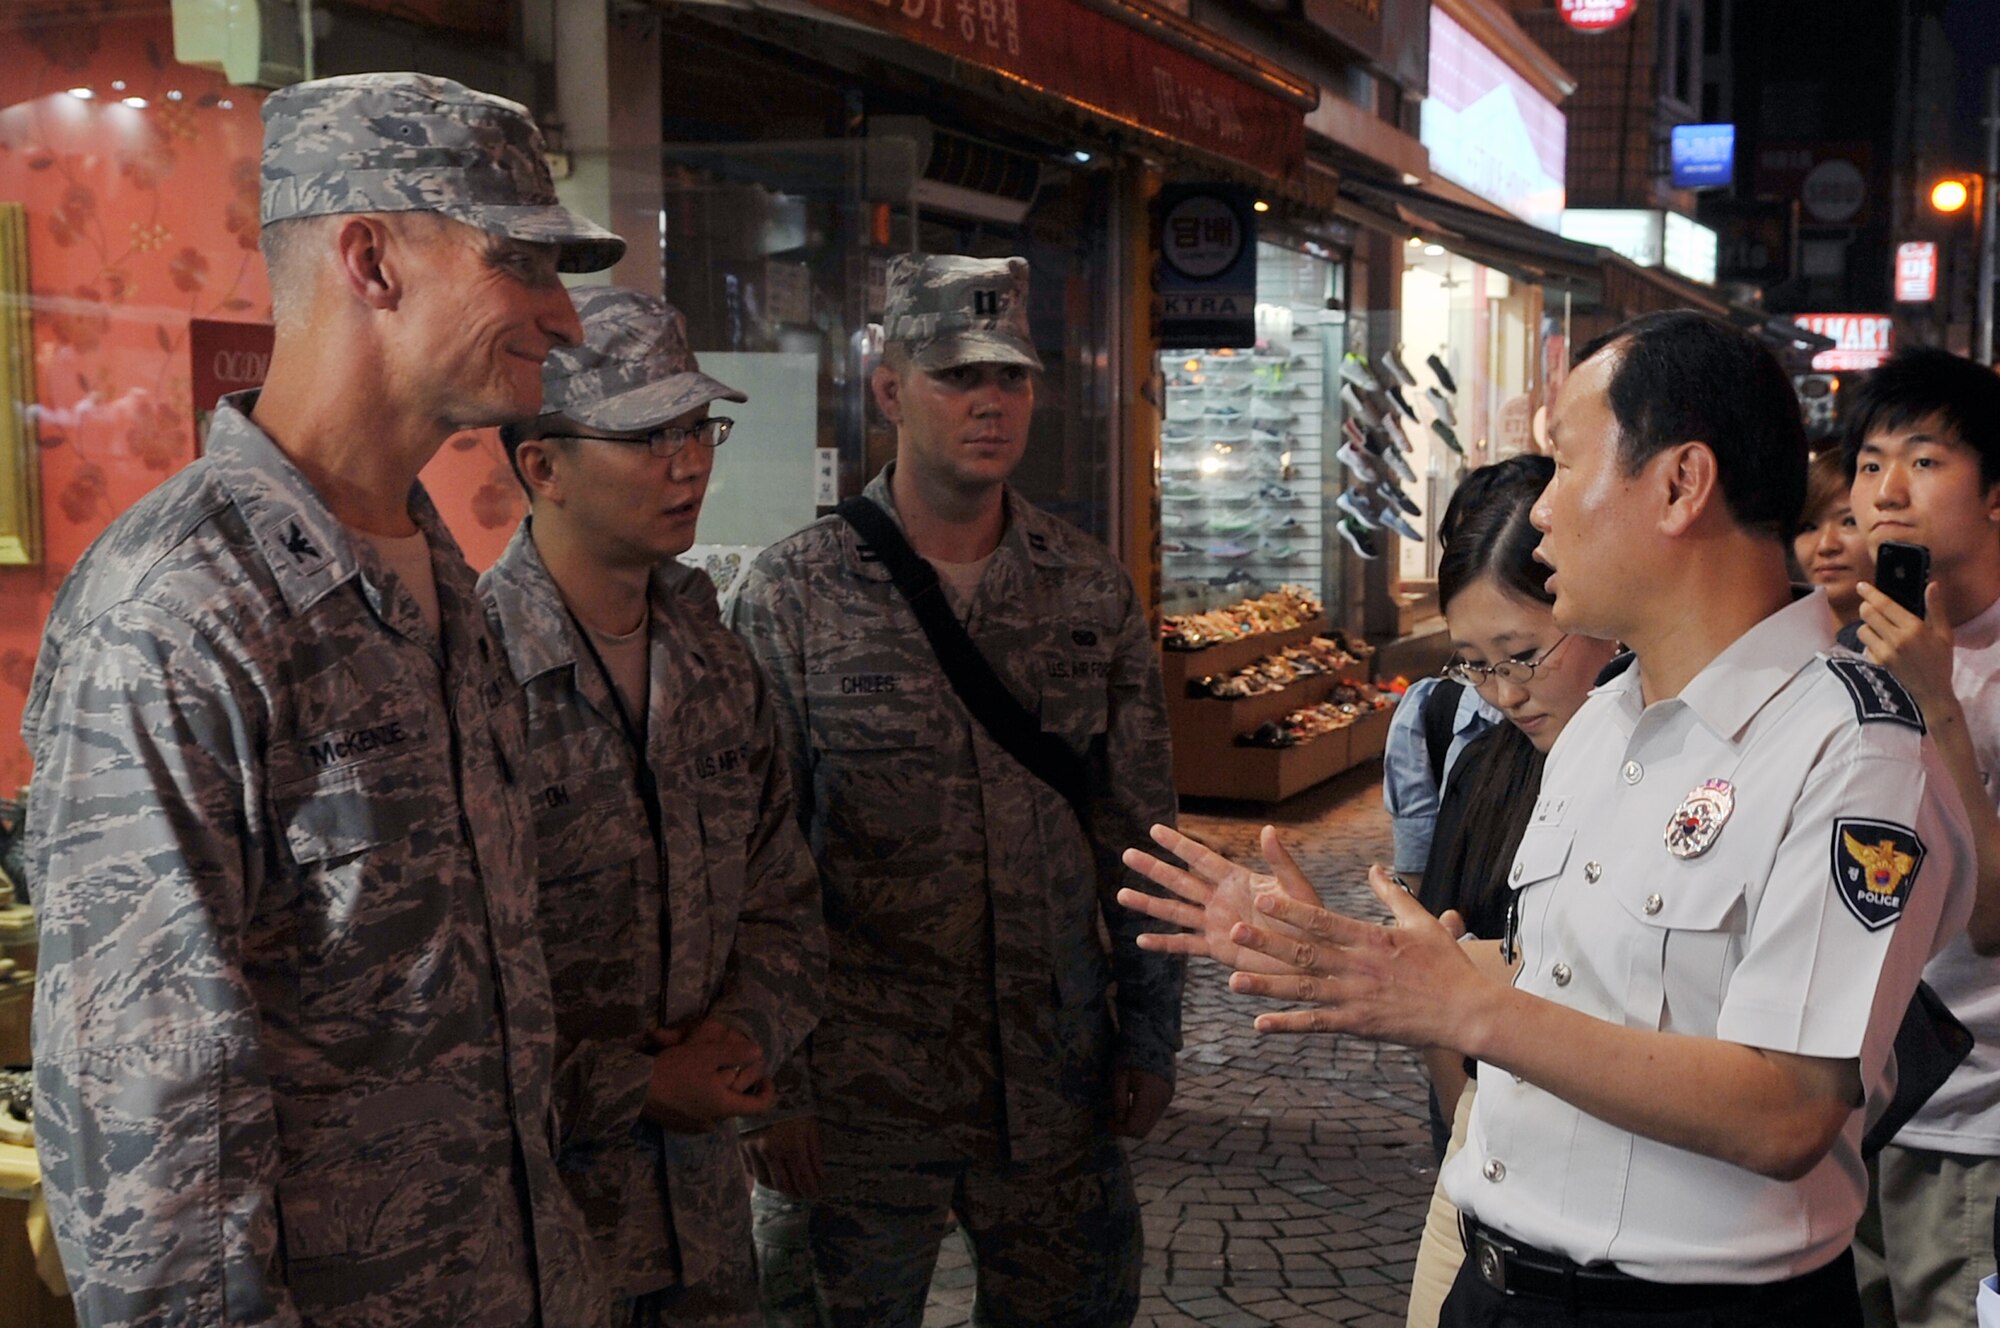 Mr. Sang Yung Pak, Chief of Pyeongtaek Police, describes Korean National Police authority with Col. Patrick McKenzie (left), 51st Fighter Wing commander, Staff Sgt. Daniel Oh, 51st Medical Group independent duty medical technician, and Capt. Cody Chiles, 51st FW Public Affairs, during a joint town patrol in the Songtan Entertainment District July 10, 2012. Base officials and Korean National Police conducted a joint town patrol in Songtan as a way to strengthen the ROK and United States alliance. The patrol also highlighted the importance of joint partnership in law enforcement and force protection. (U.S. Air Force photo/Staff Sgt. Craig Cisek)